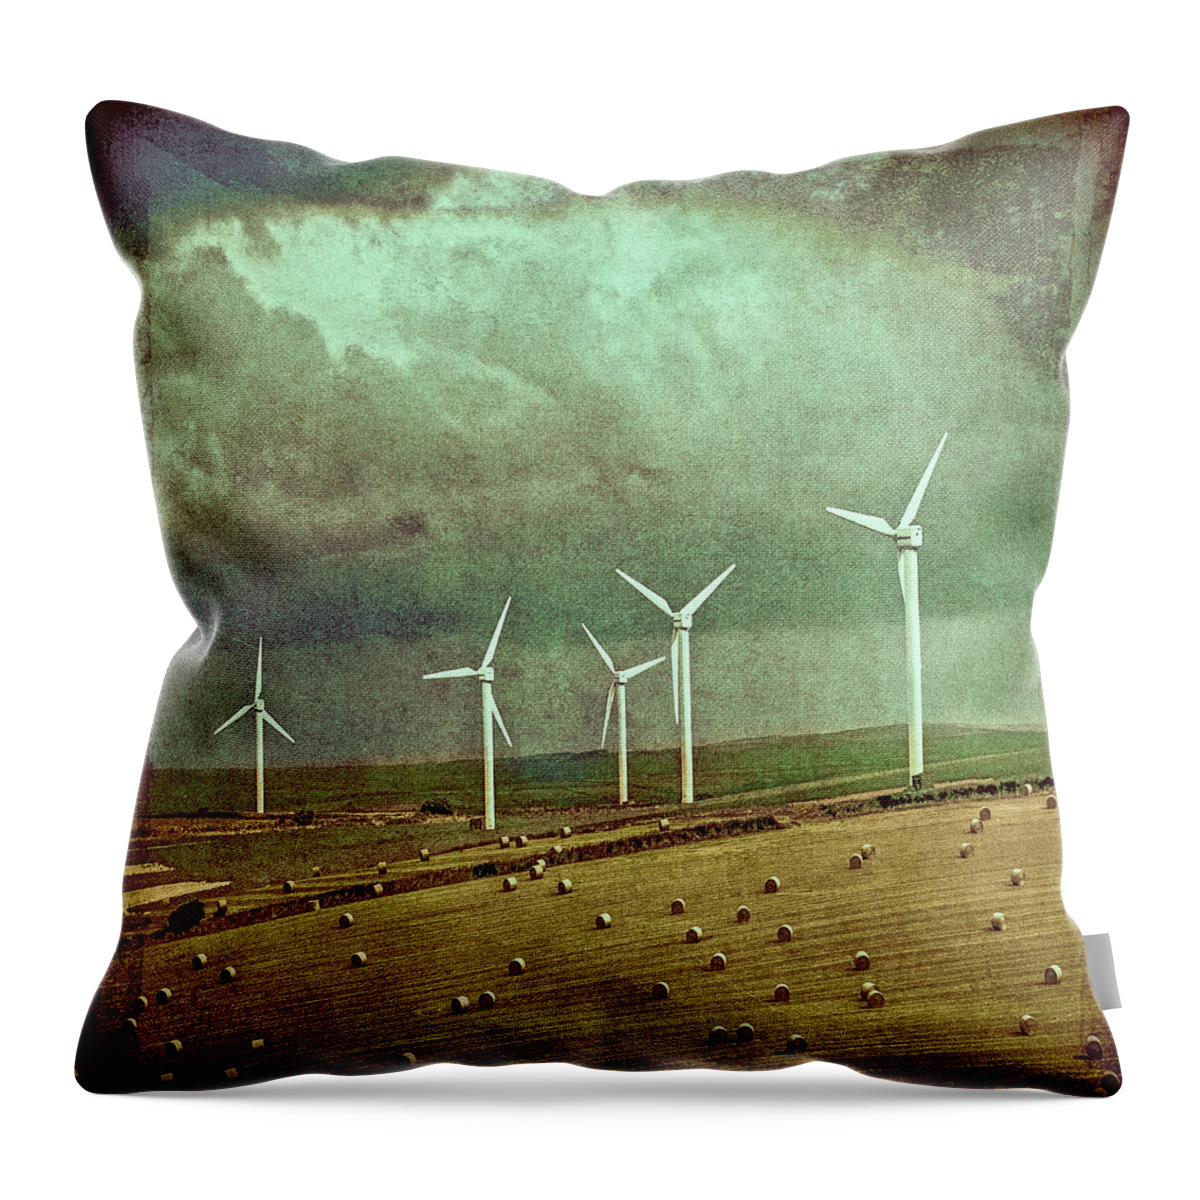 Tranquility Throw Pillow featuring the photograph A Wind Farm In Cornwall, England by Doug Armand